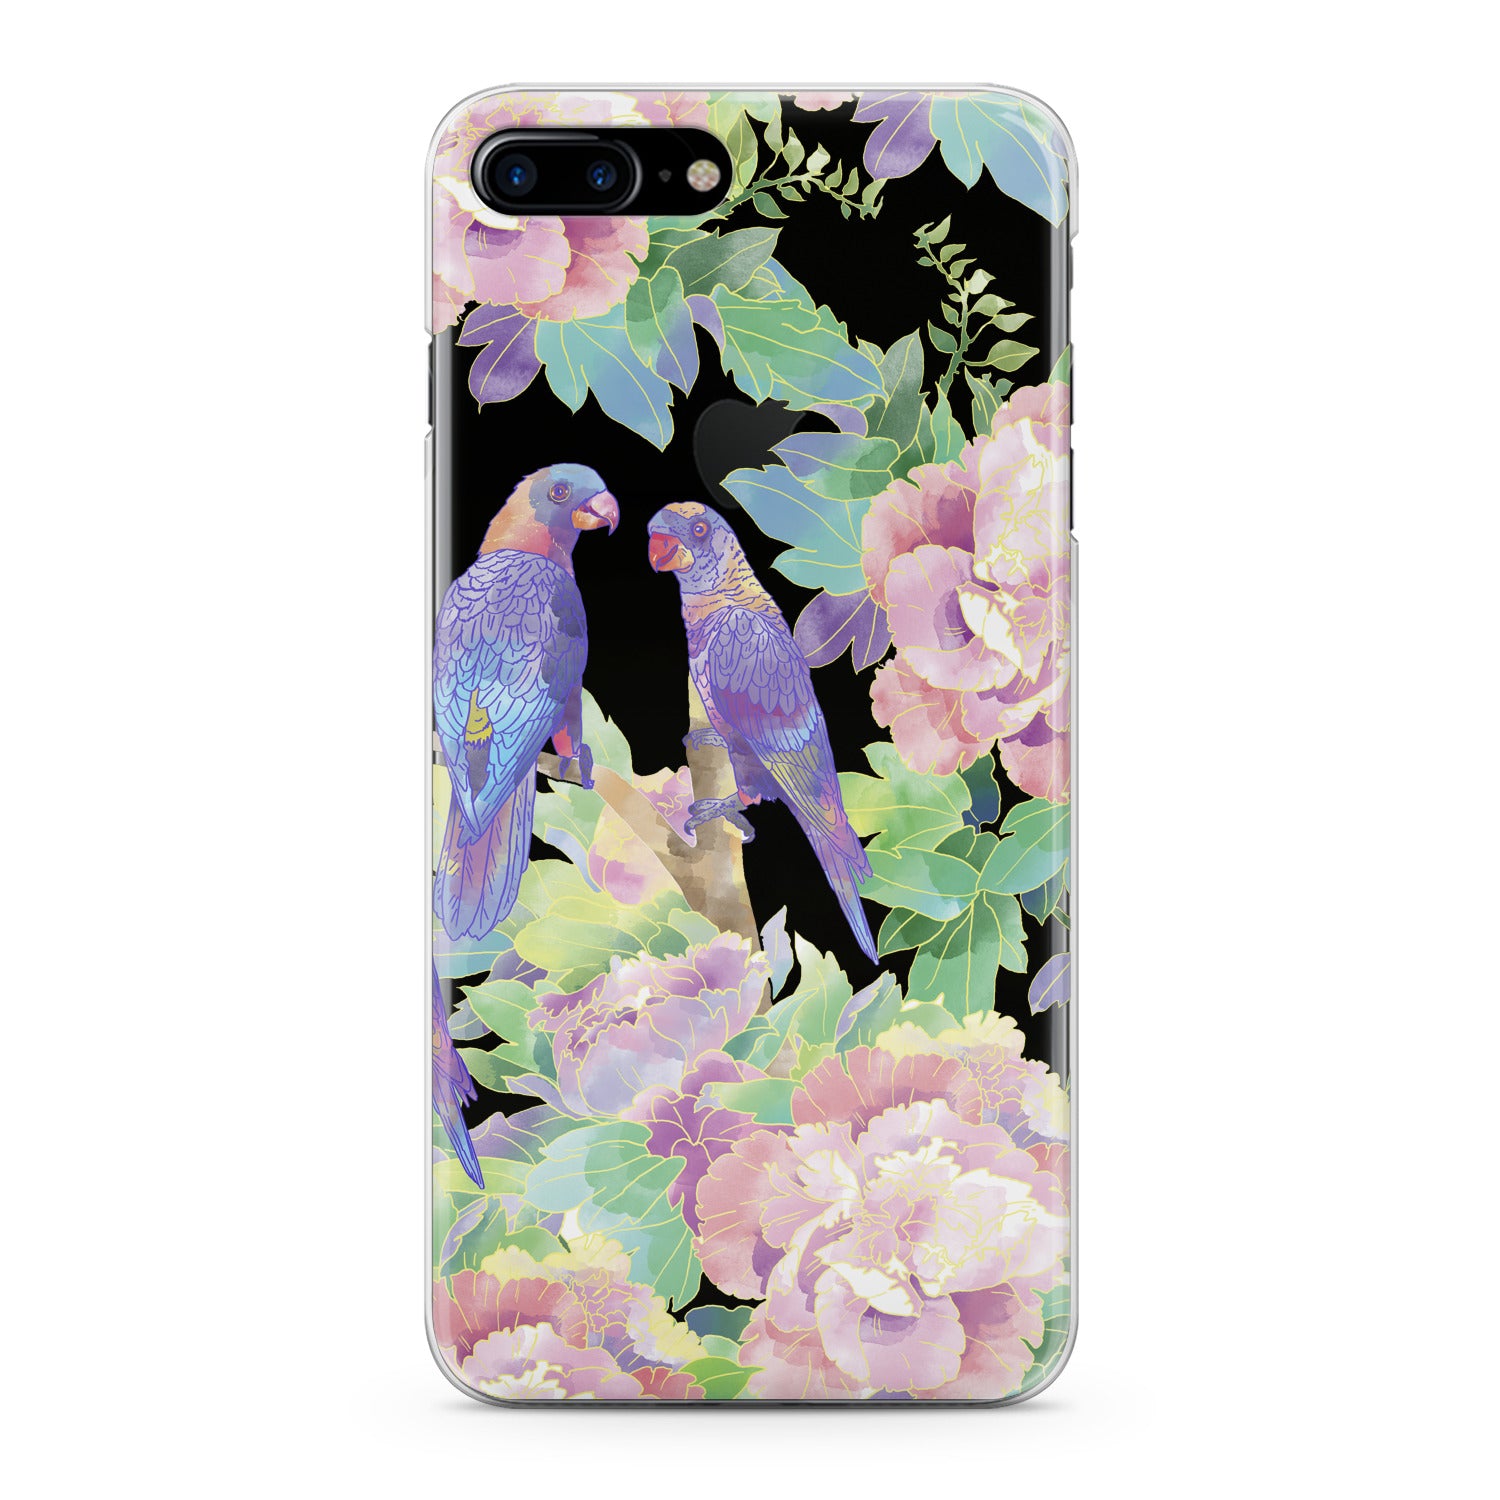 Lex Altern Purple Parrots Phone Case for your iPhone & Android phone.